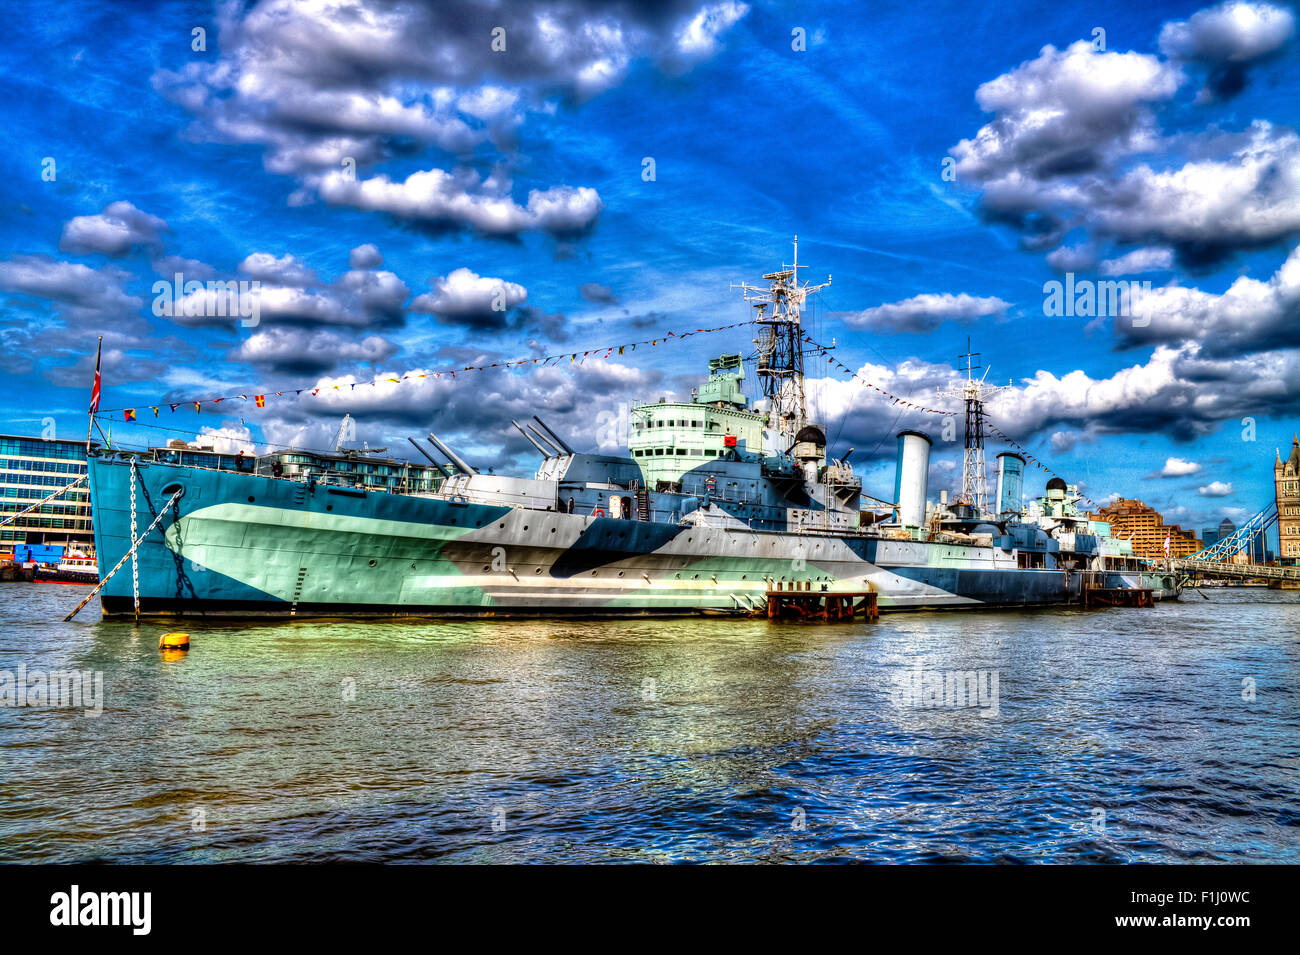 HMS Belfast, famous warship on River Thames. London City on a background. Tourists walking on the deck of the ship. HDR. Stock Photo